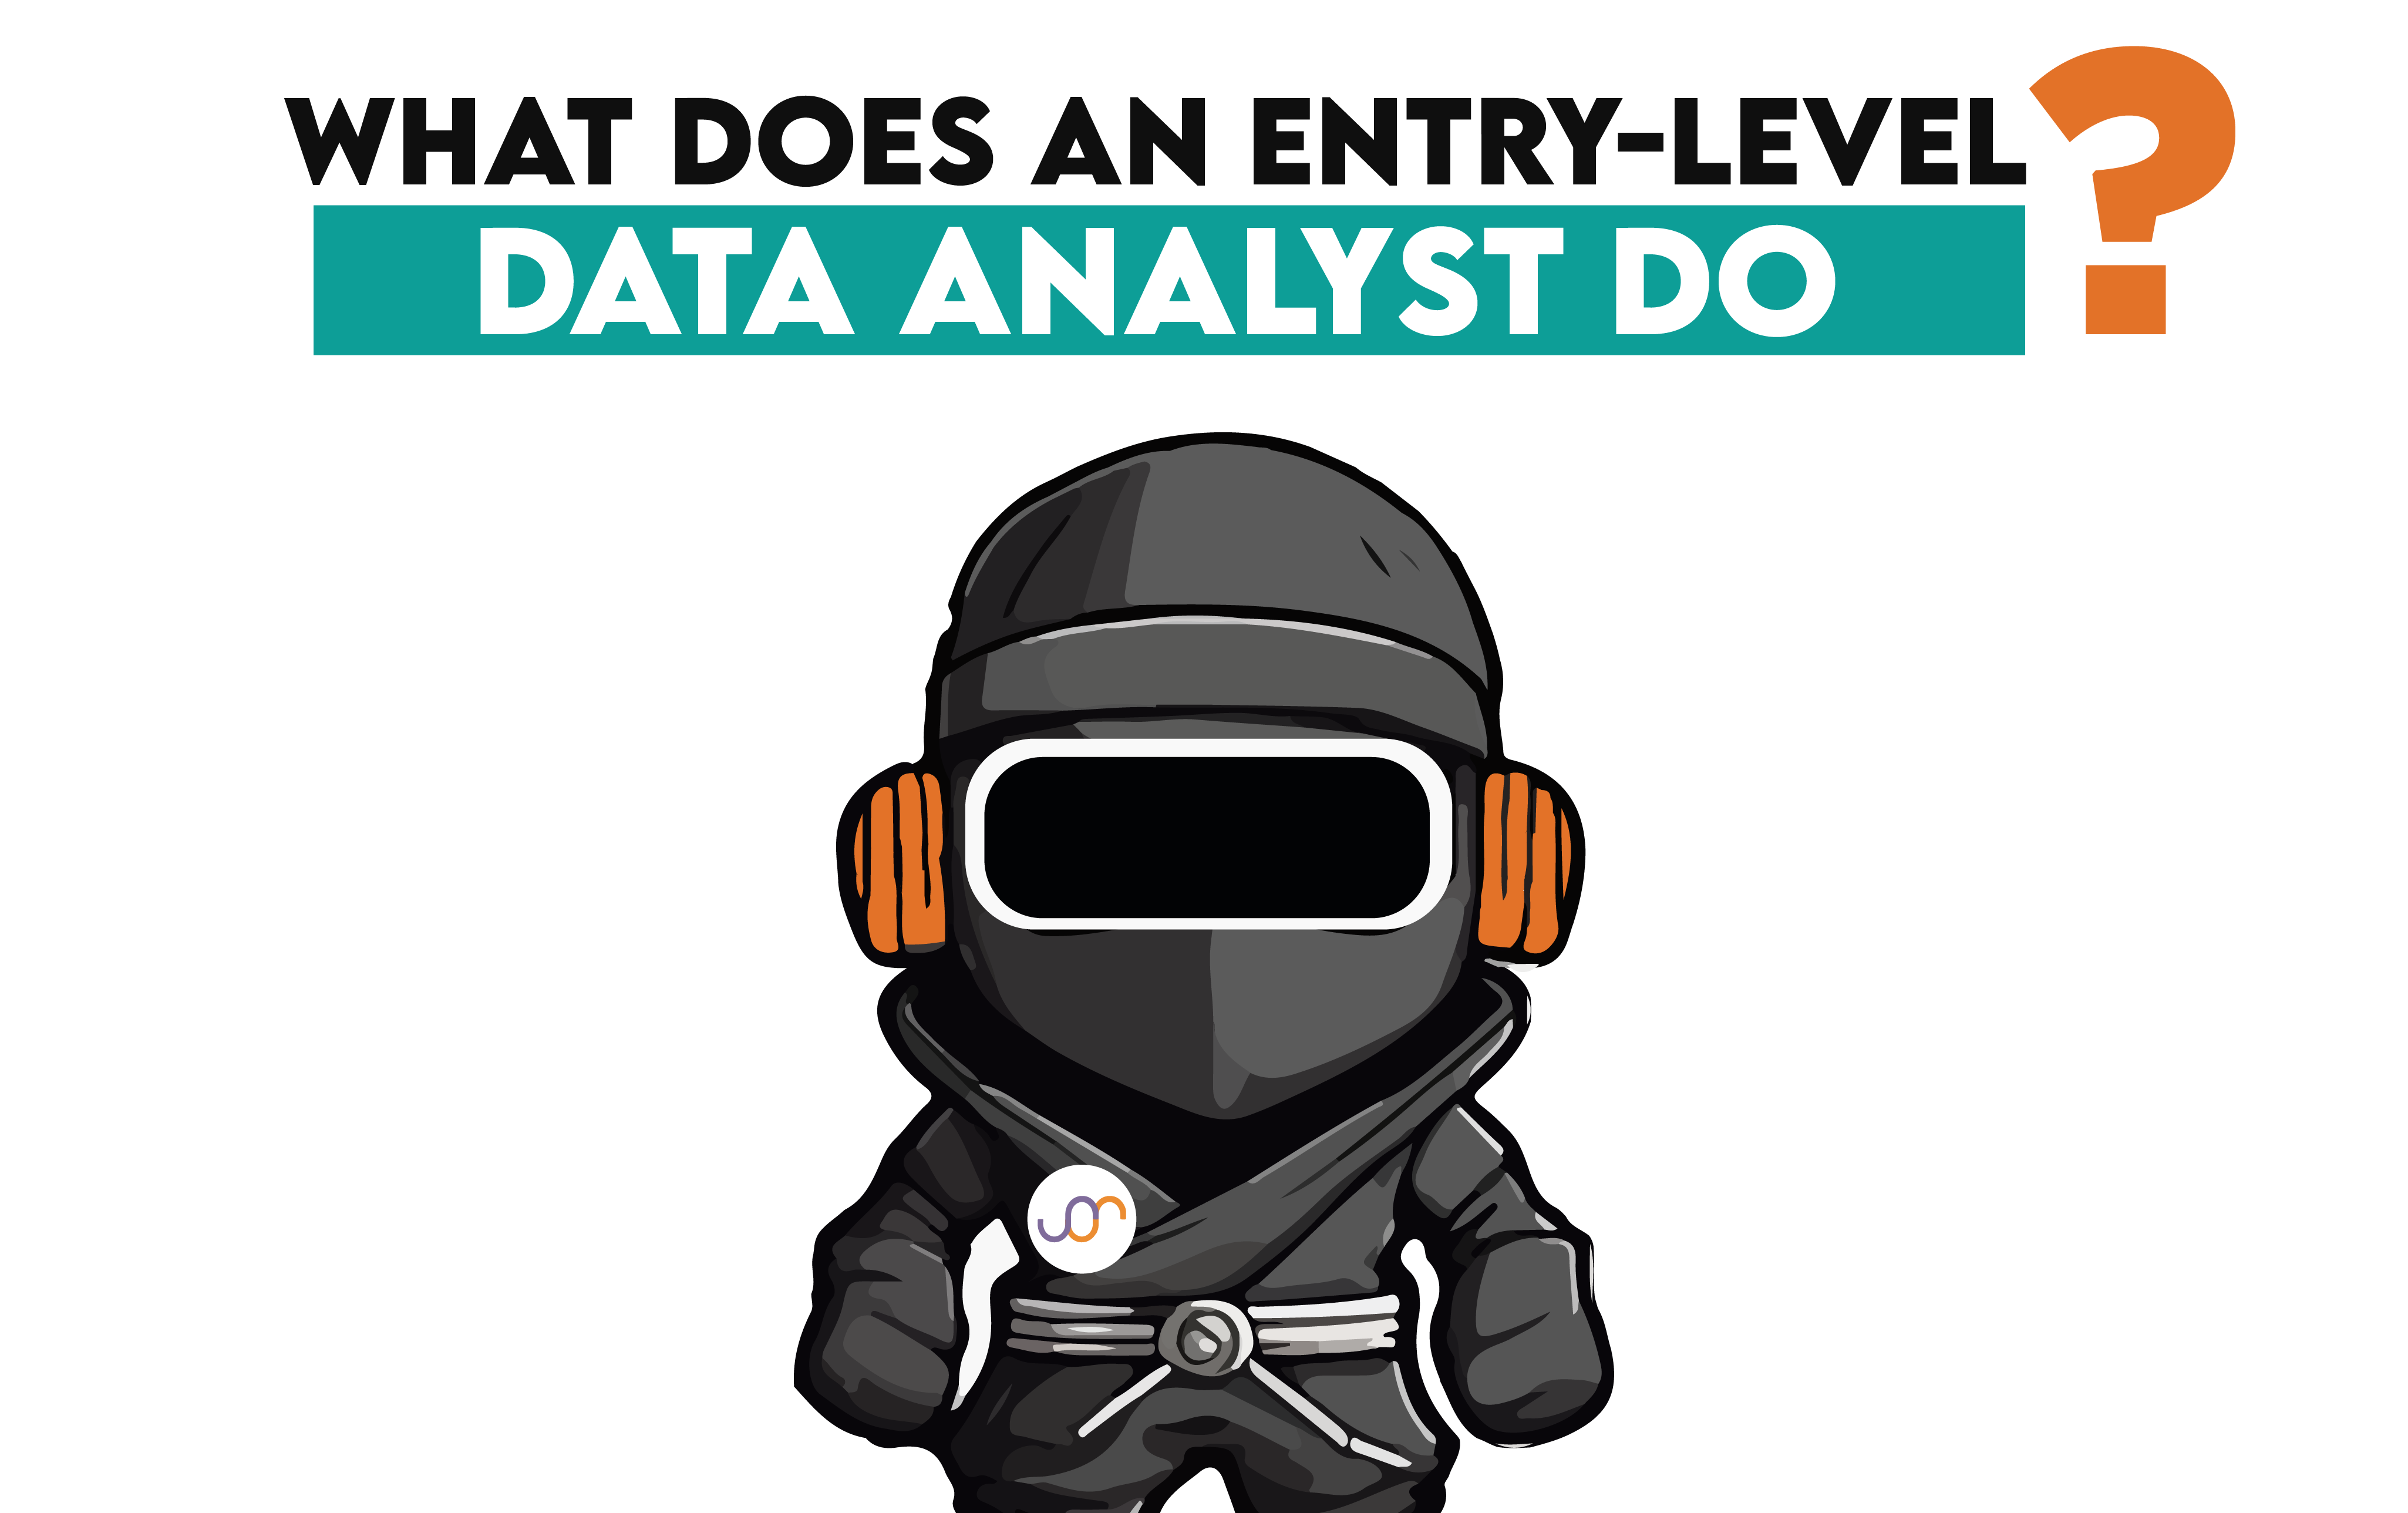 What Does an Entry Level Data Analyst Do